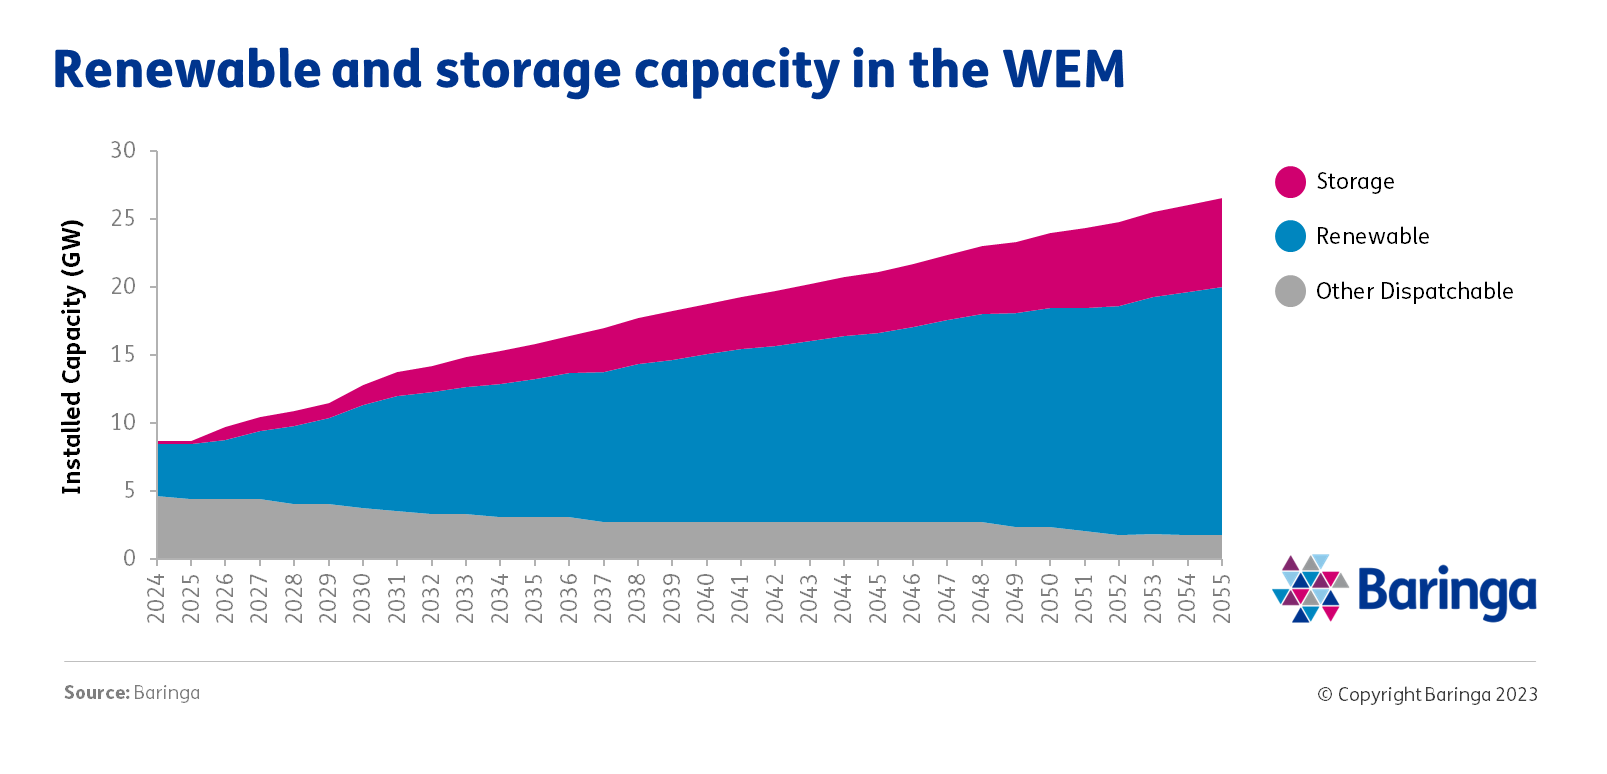 Graph showing the renewable and storage capacity in the WEM